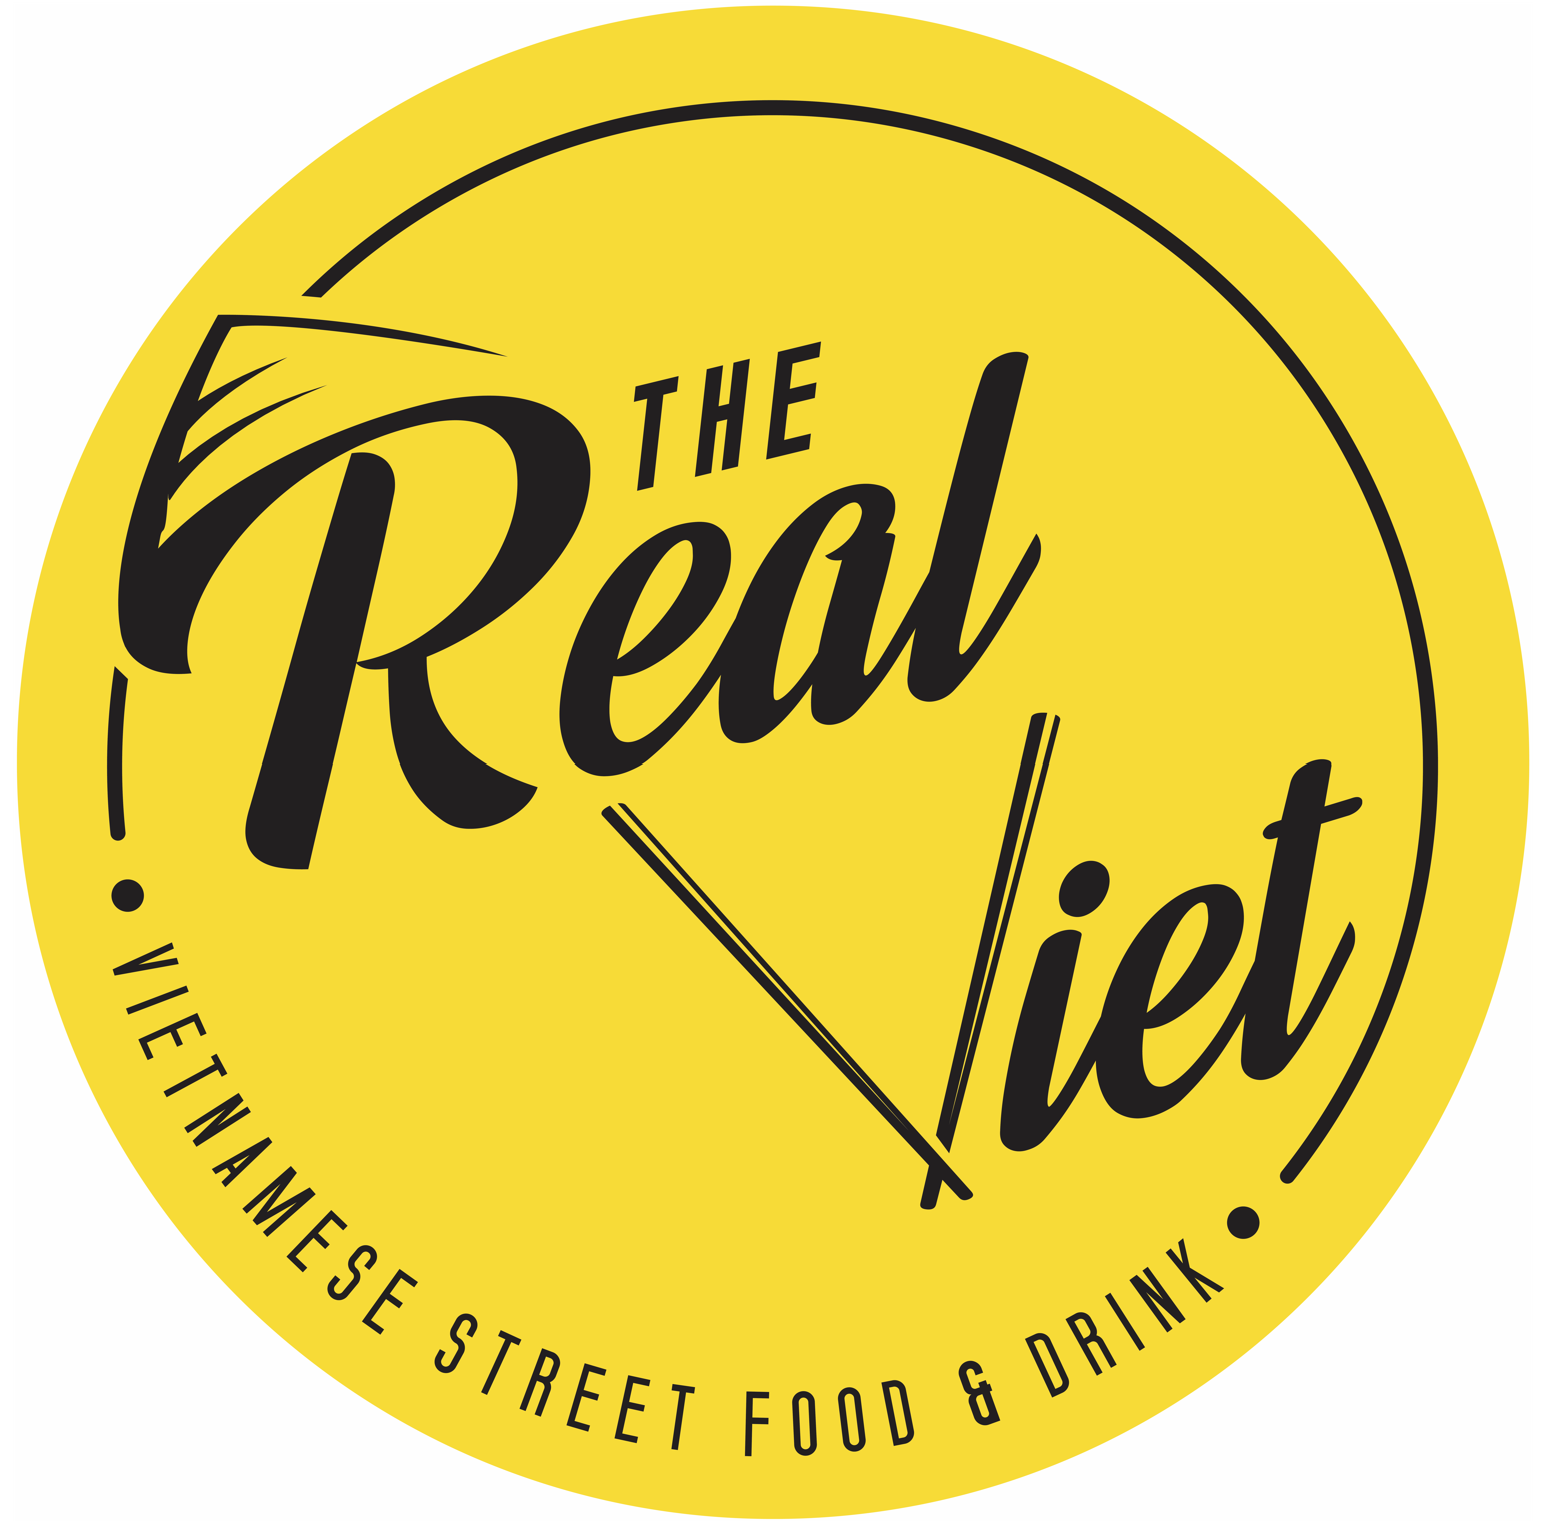 The Real Viet – New Vietnamese Street Food coming soon!